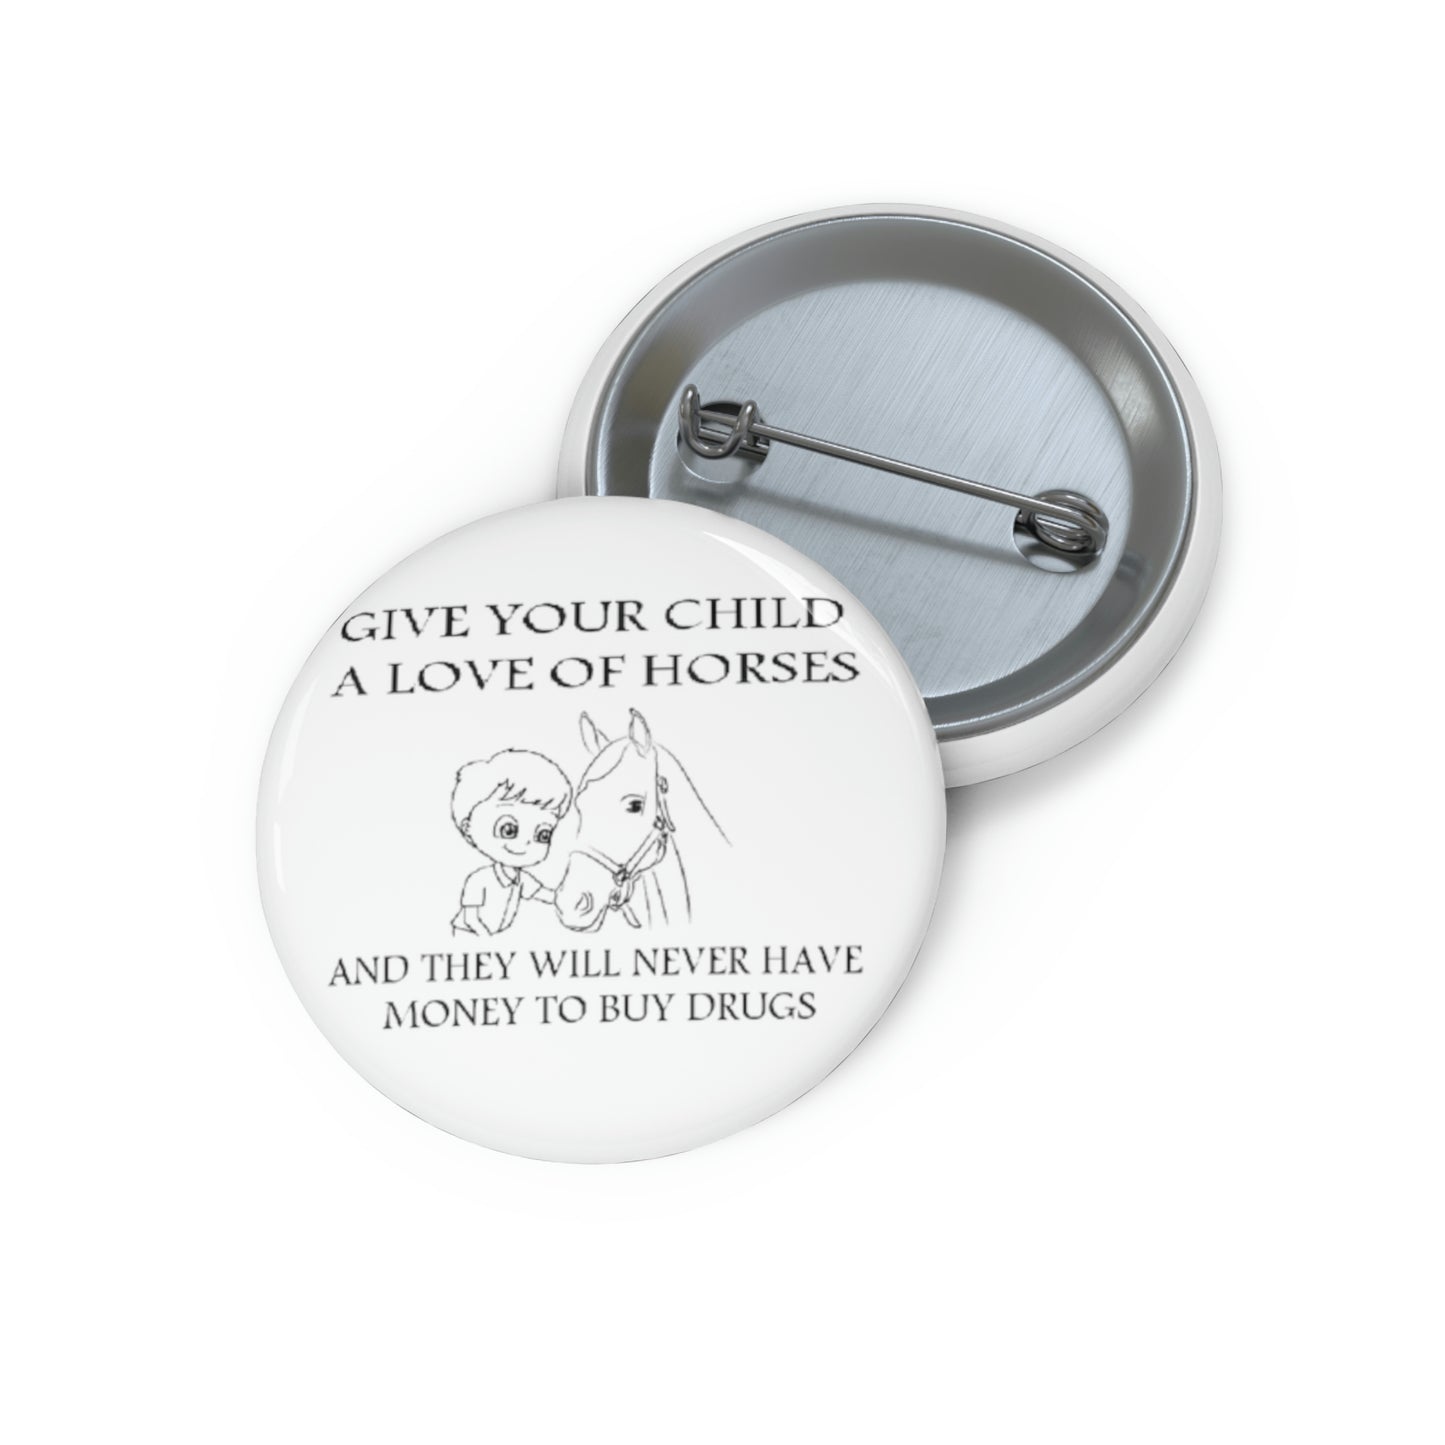 Say NO to Drugs - Custom Pin Buttons - White